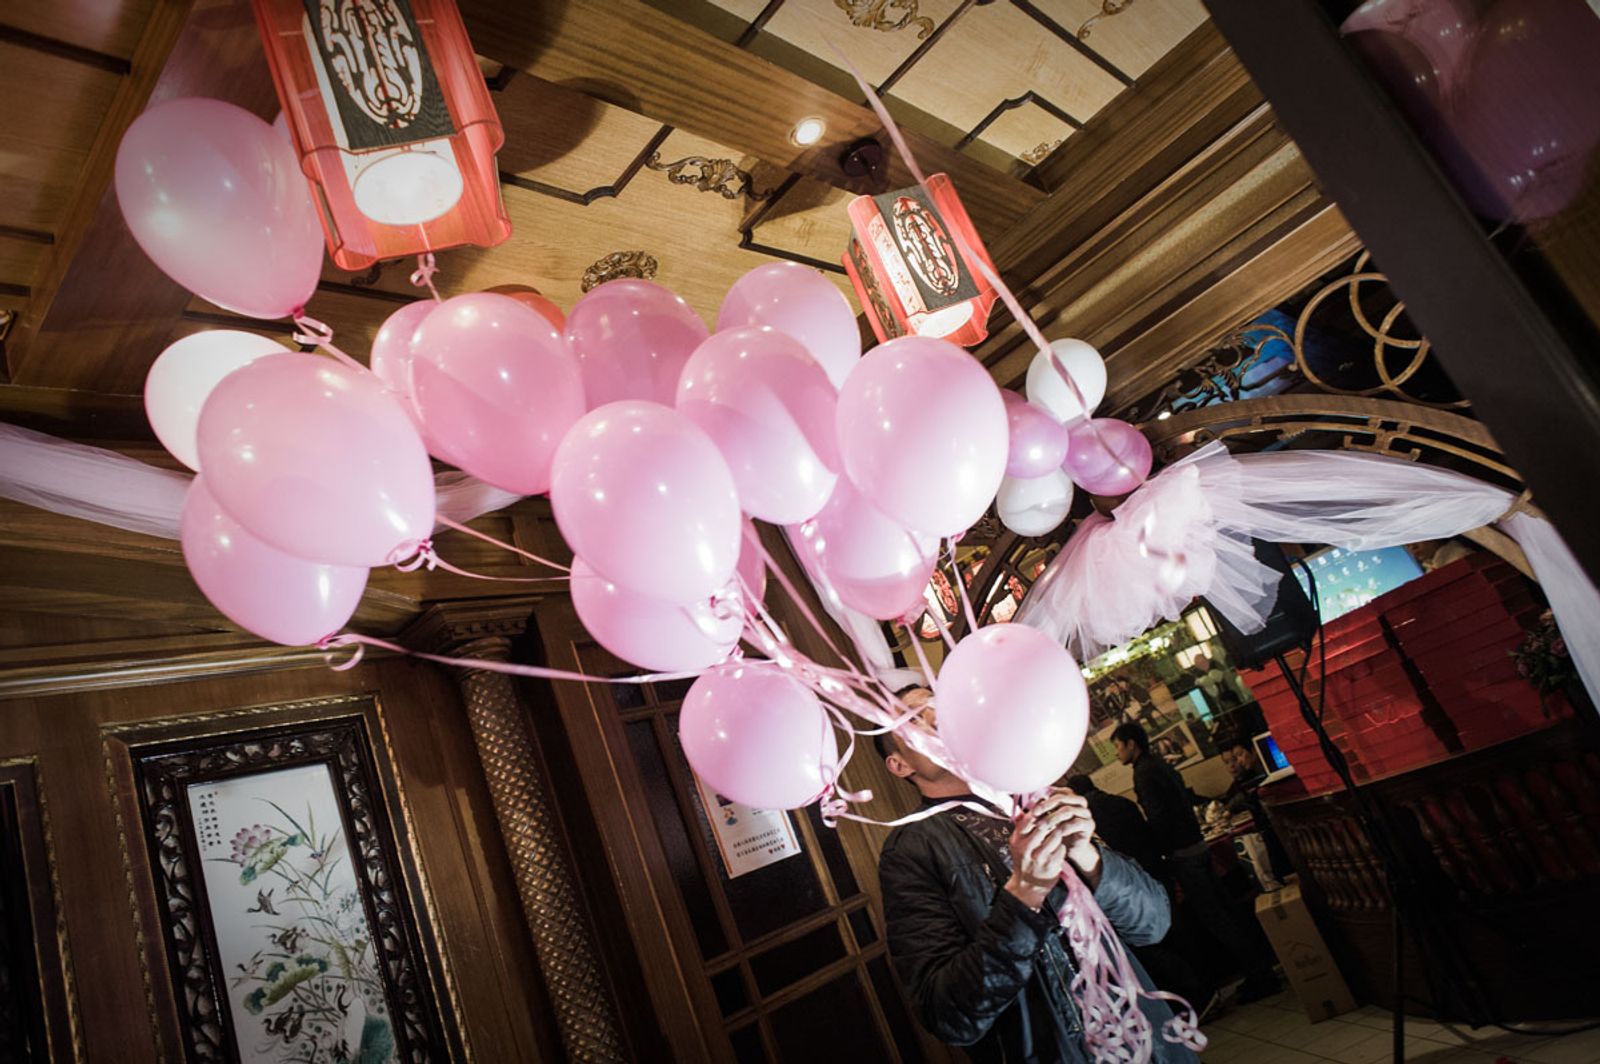 © Agnese Morganti - Prato, Pink balloons as decorations for a Chinese engagement party.